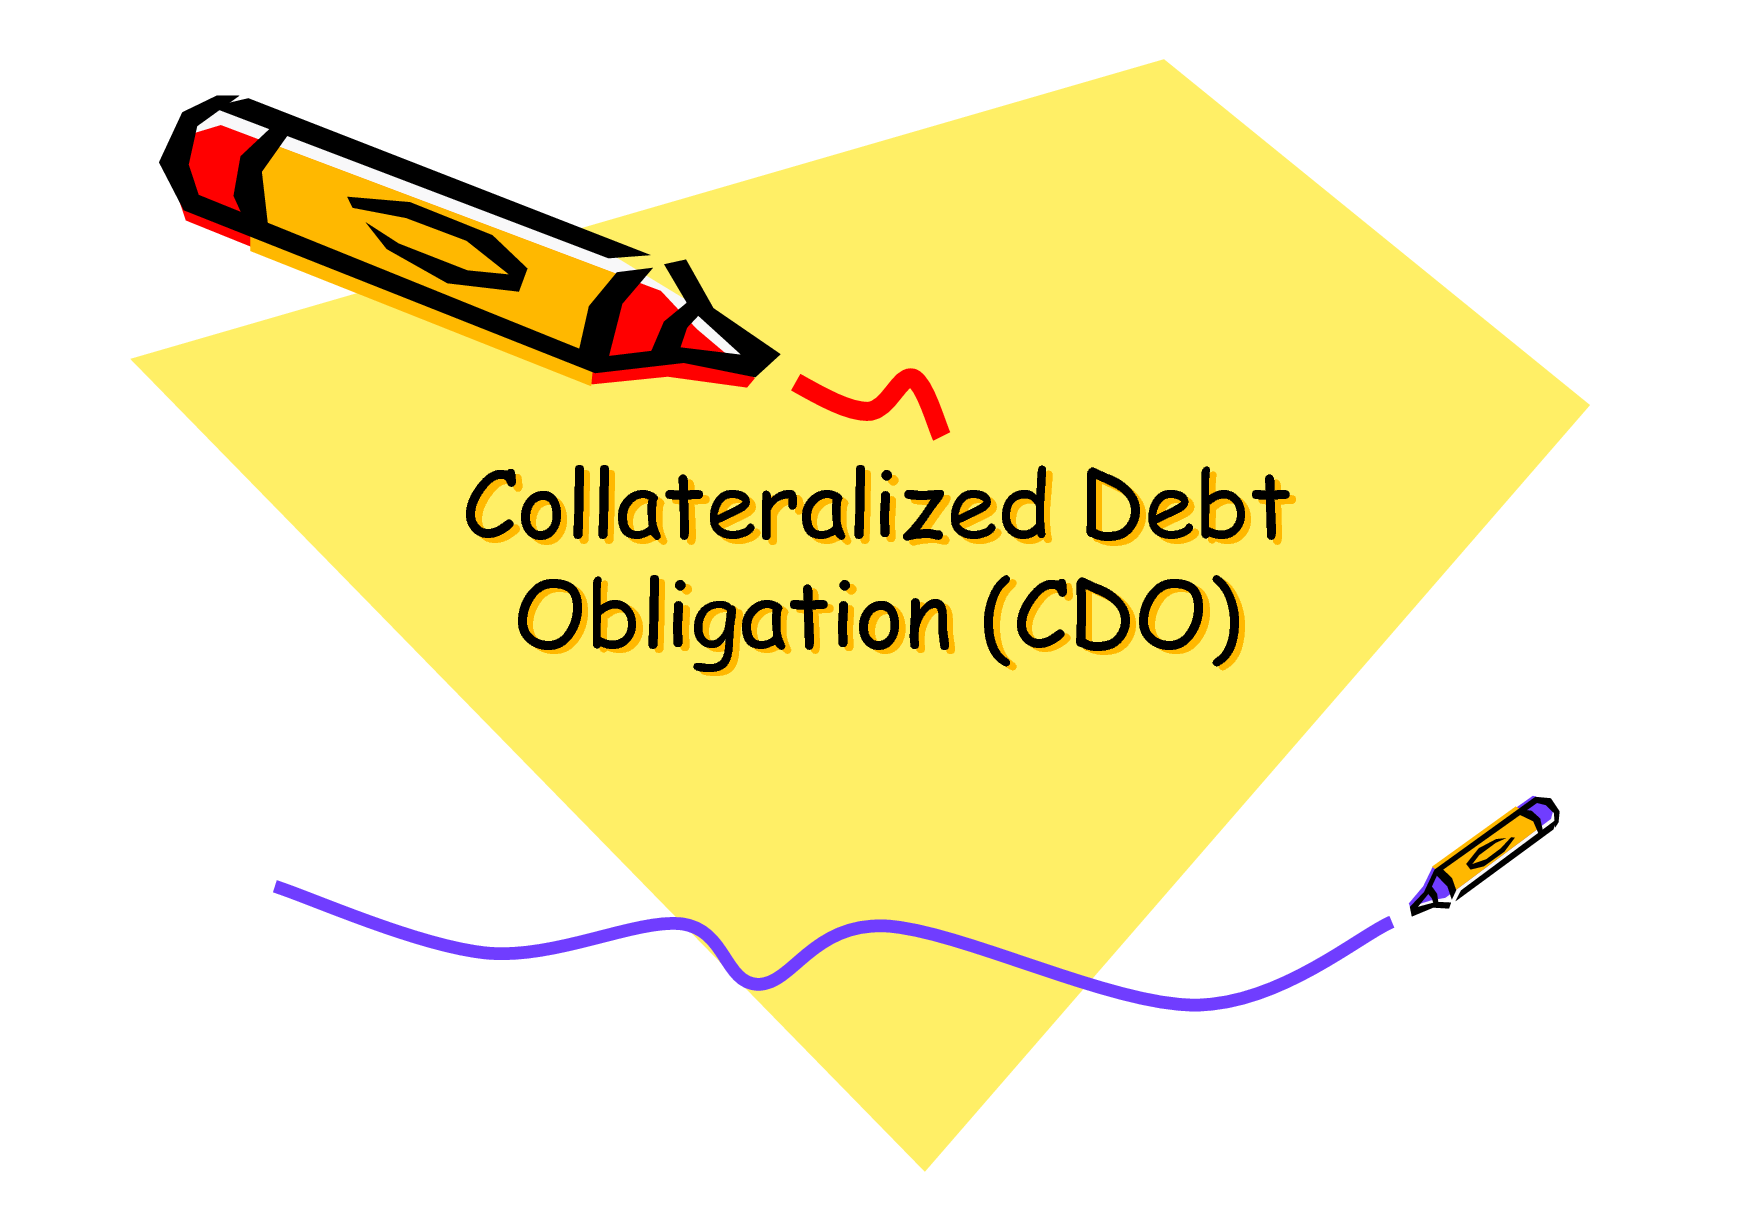 Сollateralized debt obligation